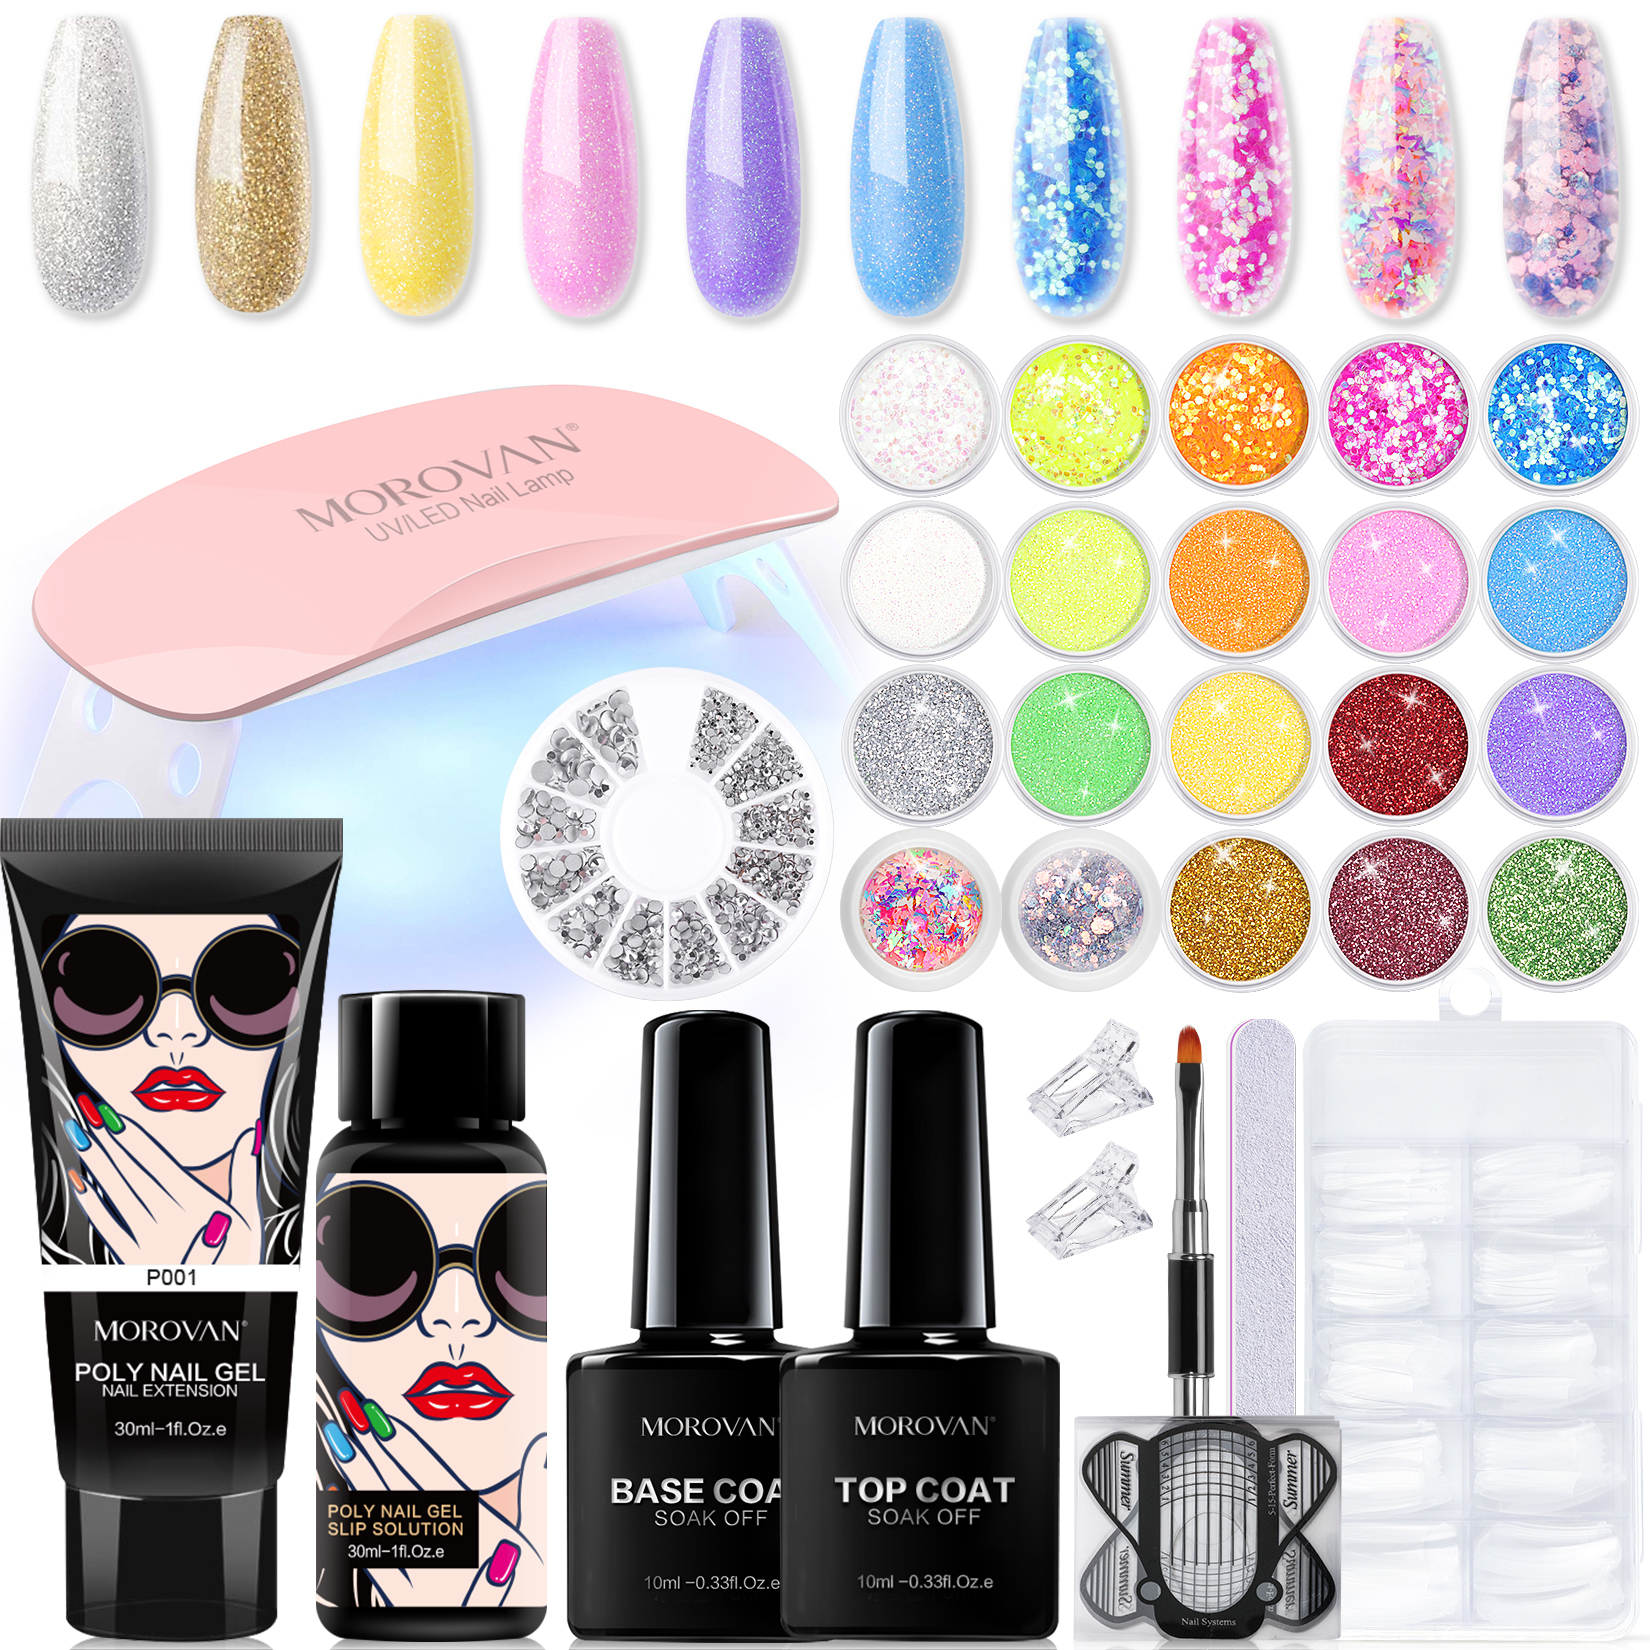 Morovan Poly Nail Gel Kit At Home - The best all-in-one nail kit.